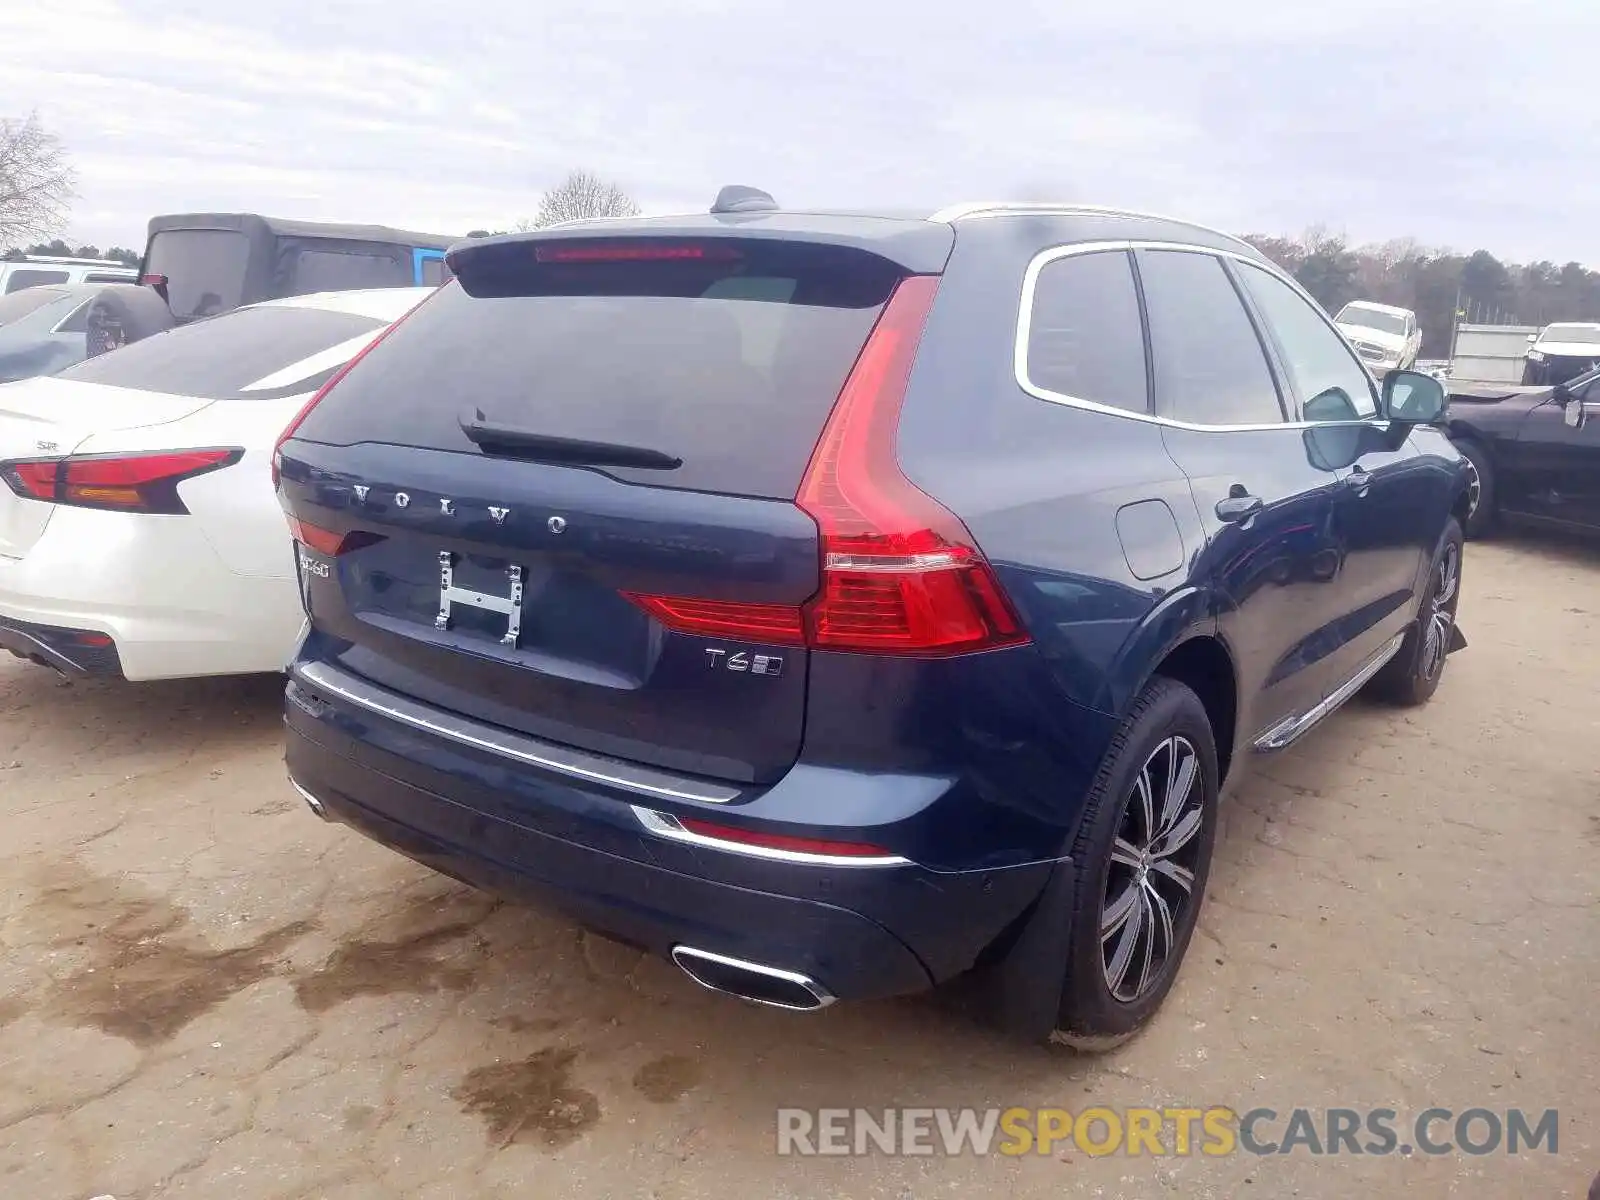 4 Photograph of a damaged car YV4A22RL4K1379683 VOLVO XC60 T6 IN 2019